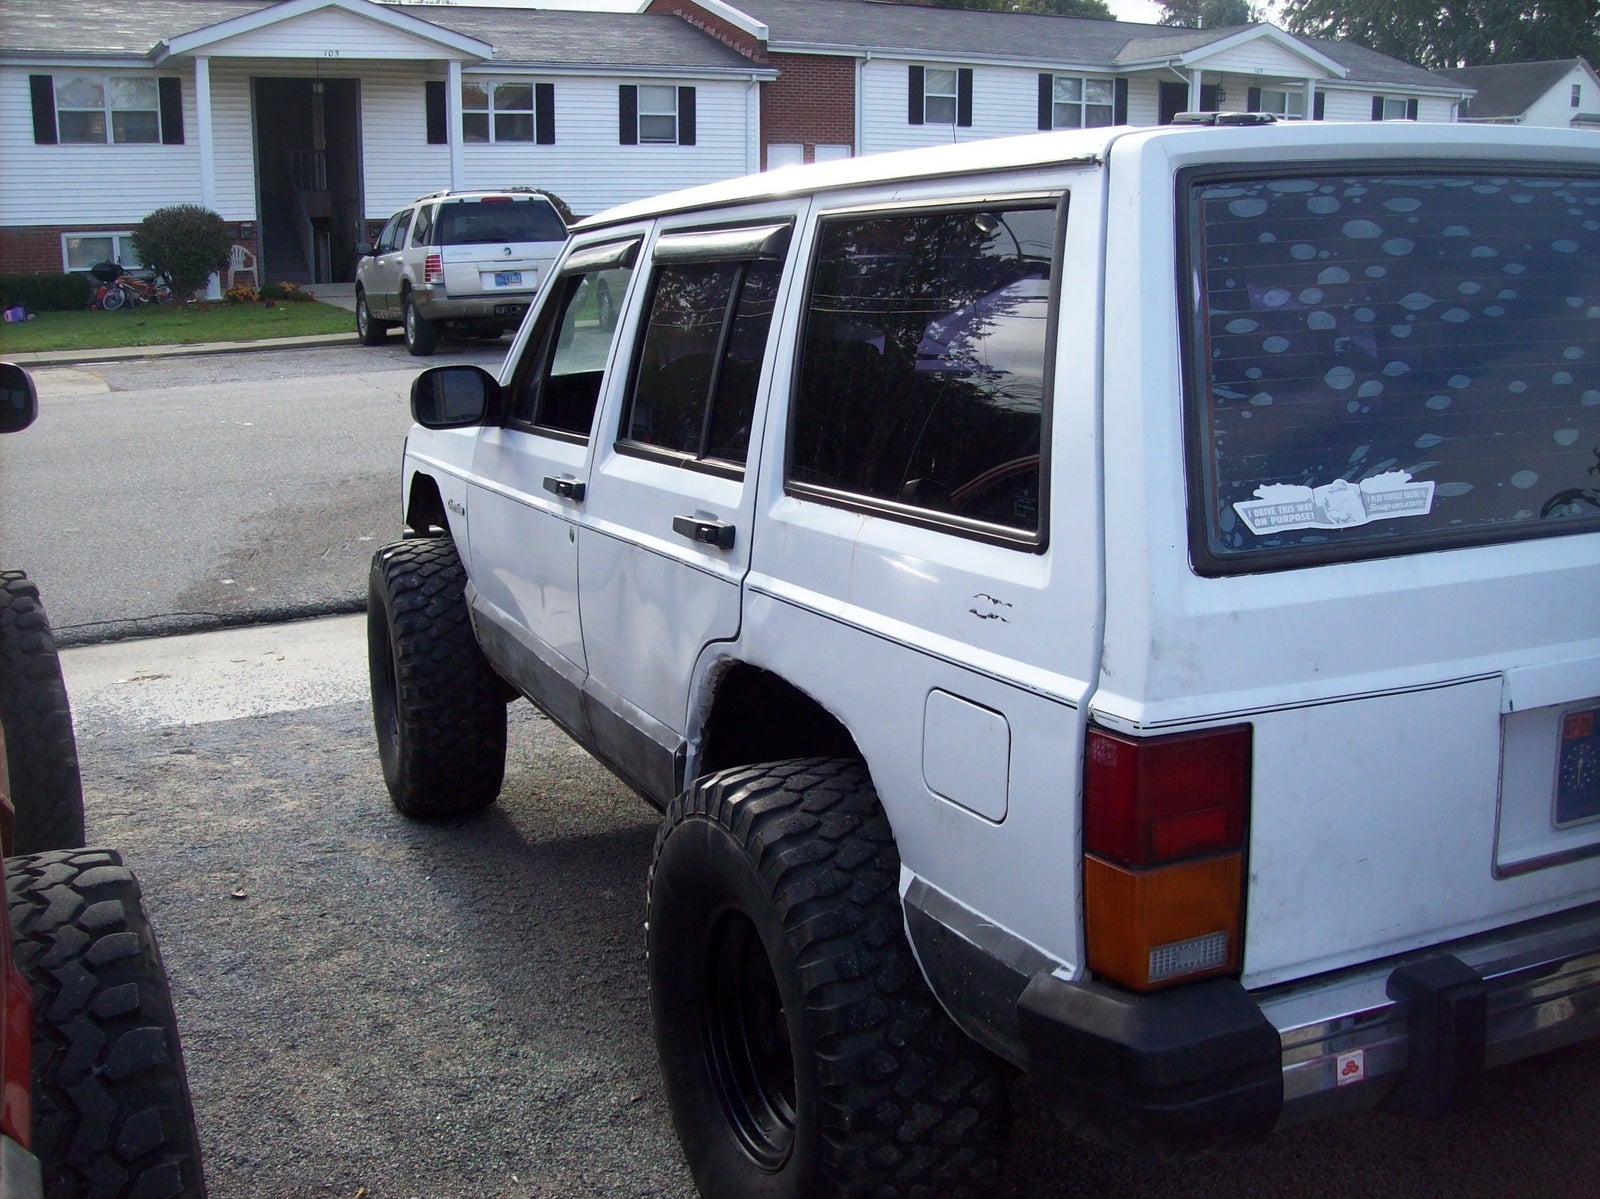 1991 Jeep Cherokee 4 Dr Limited 4WD SUV, the 33s went on the maroon jeep